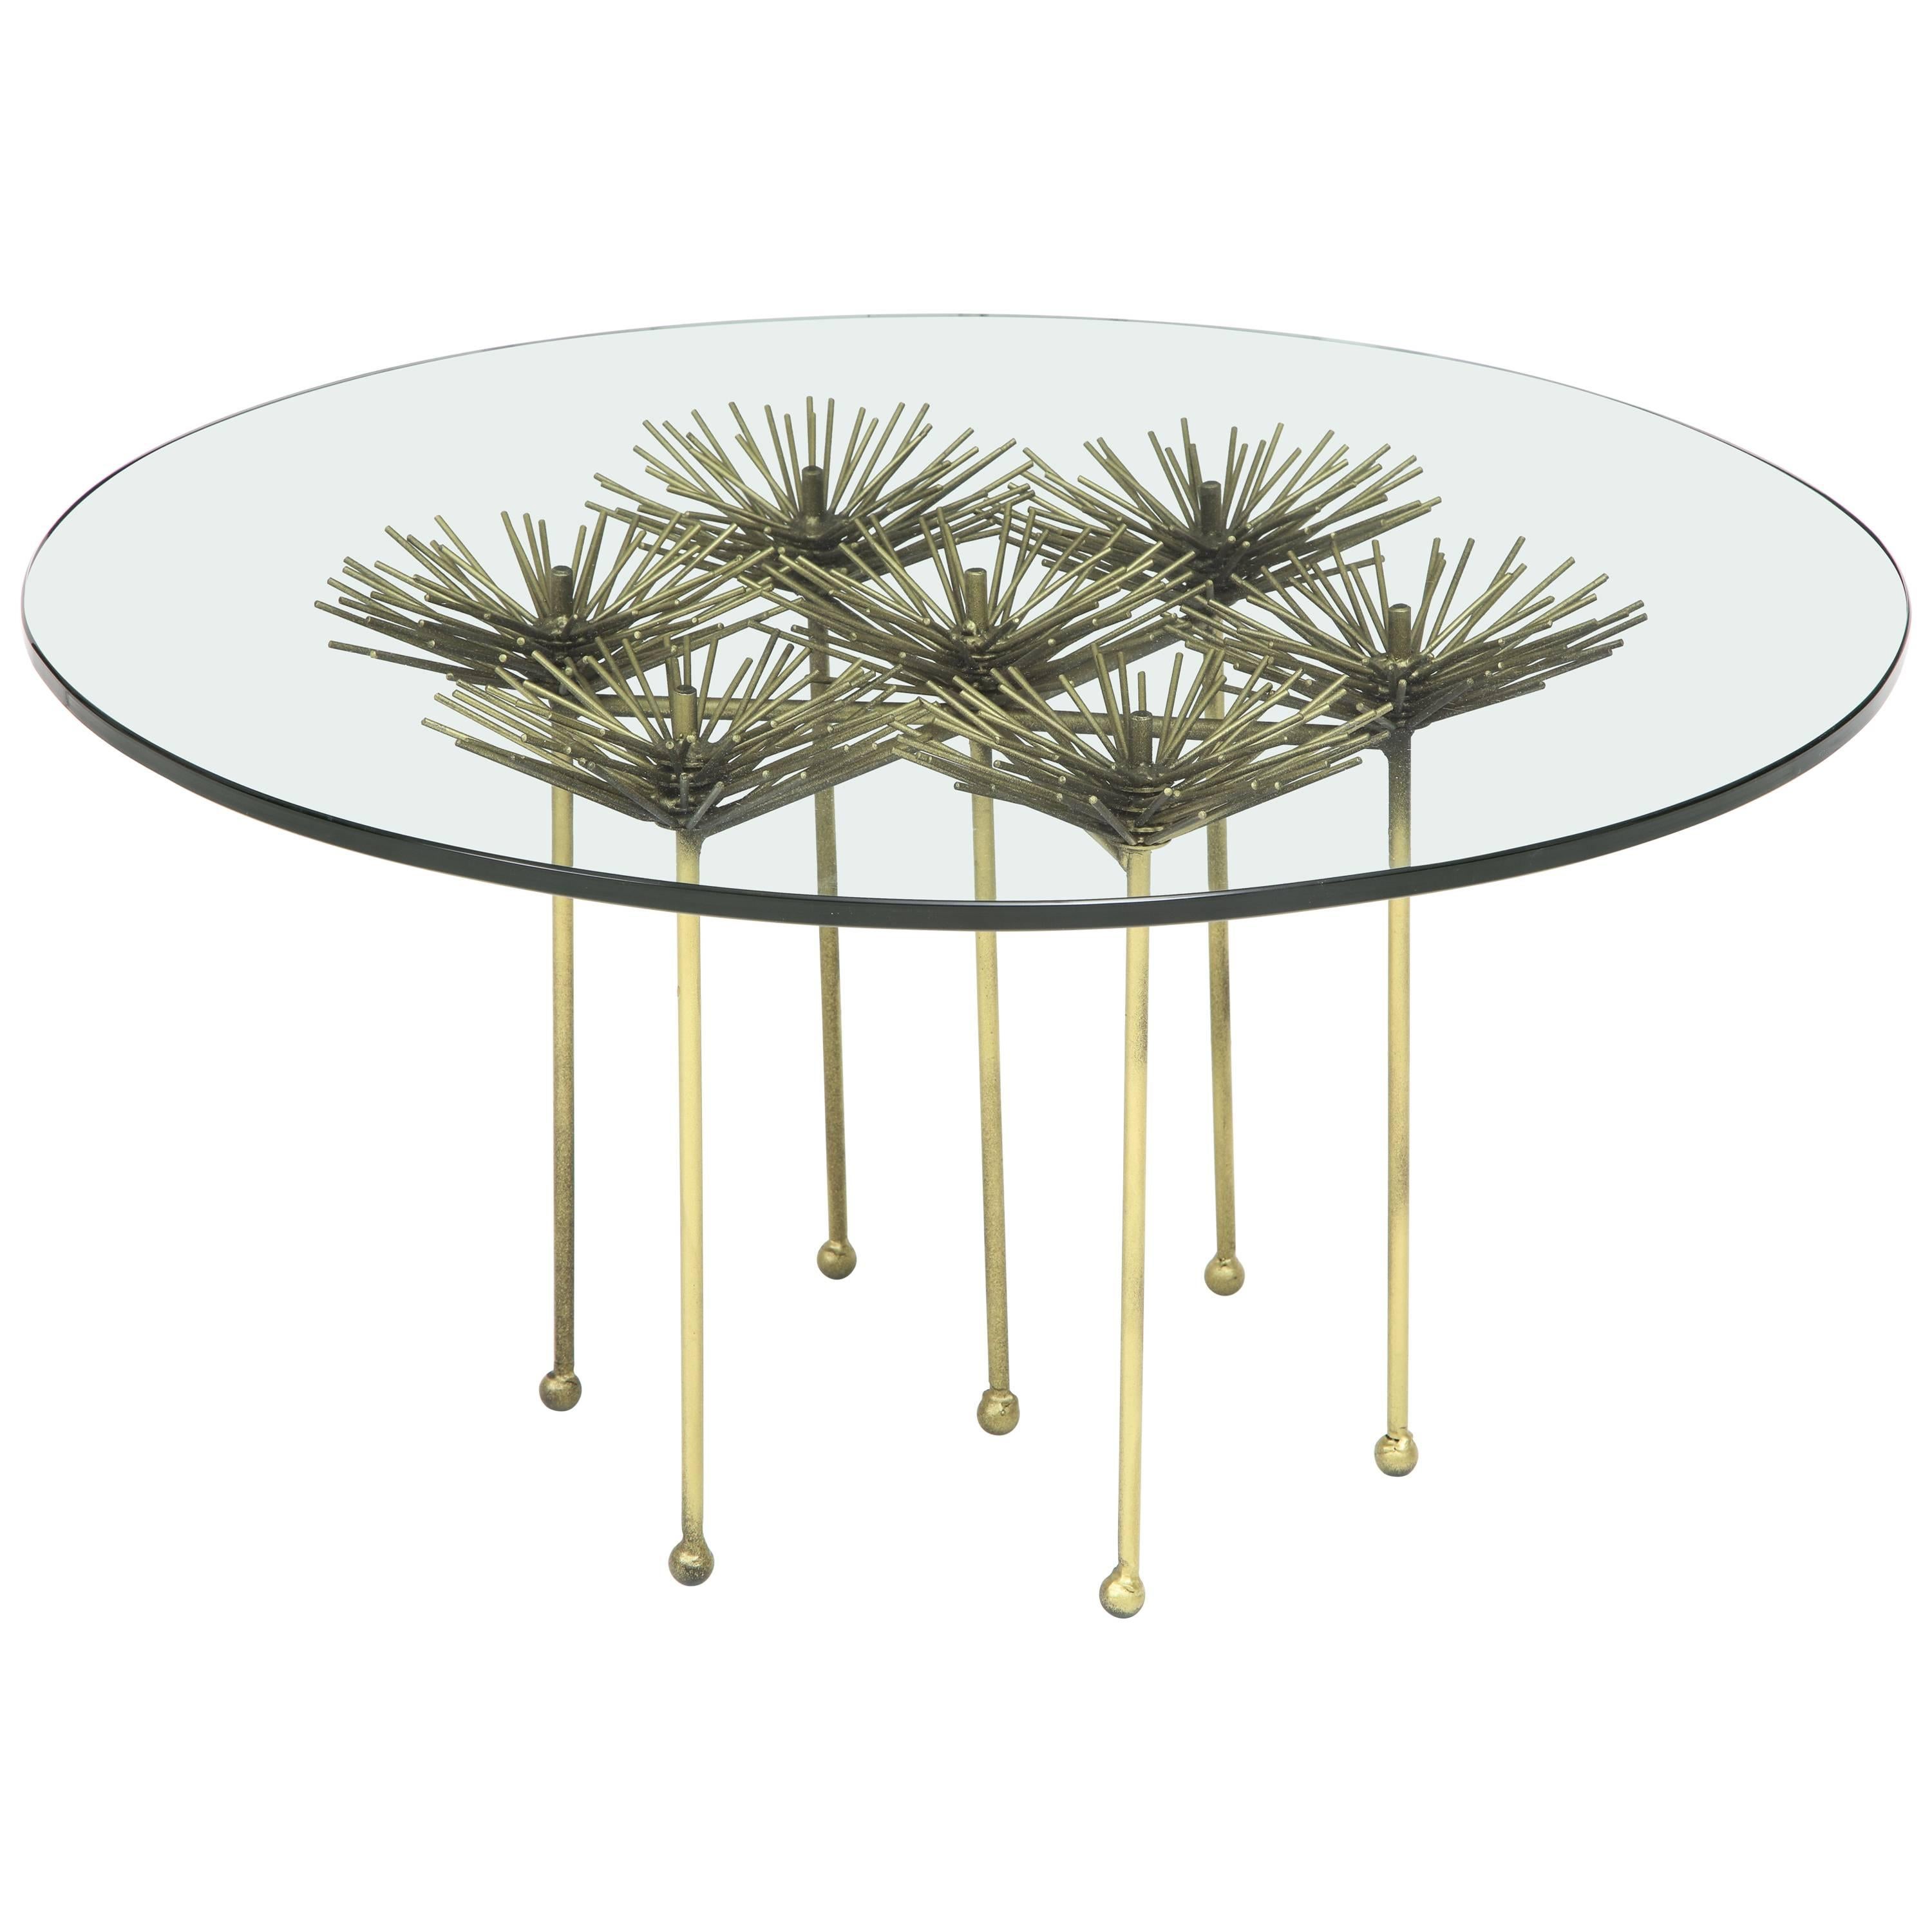 Brutalist Gilt Floral Table with Glass Top by Lost City Arts